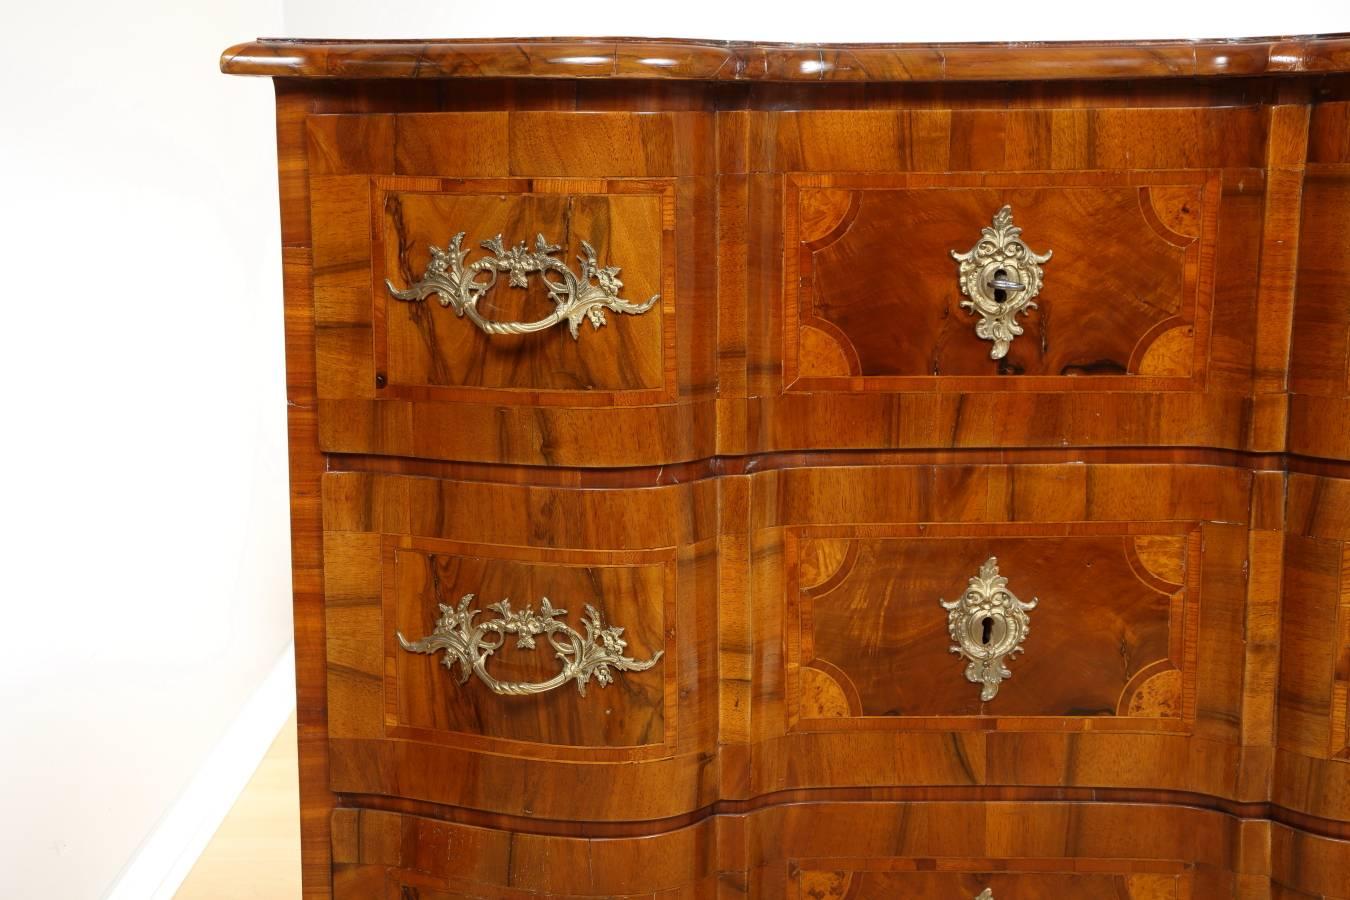 18th century Baroque walnut commode. Magnificent Baroque walnut chest of drawers with scalloped front, crafted in South Germany Baroque period. The piece is inlaid with various veneers including birch, rose, walnut, and black oak. Three drawers with